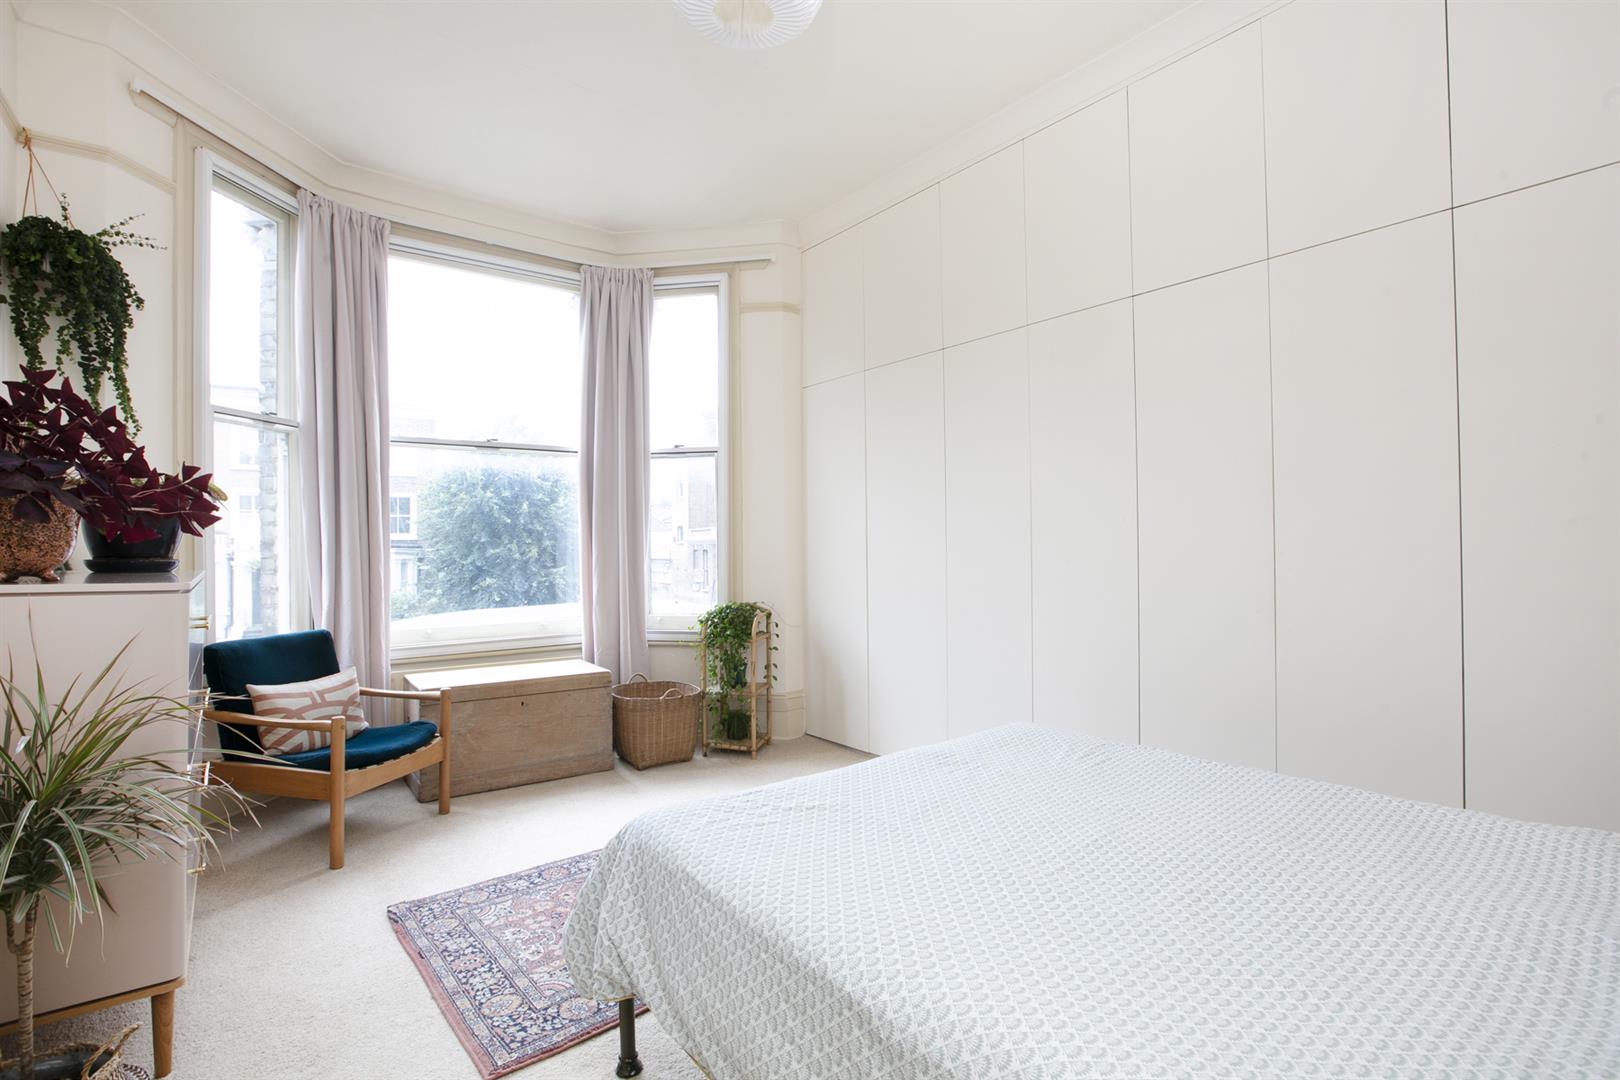 Flat - Conversion For Sale in Peckham Road, Camberwell, SE5 859 view8